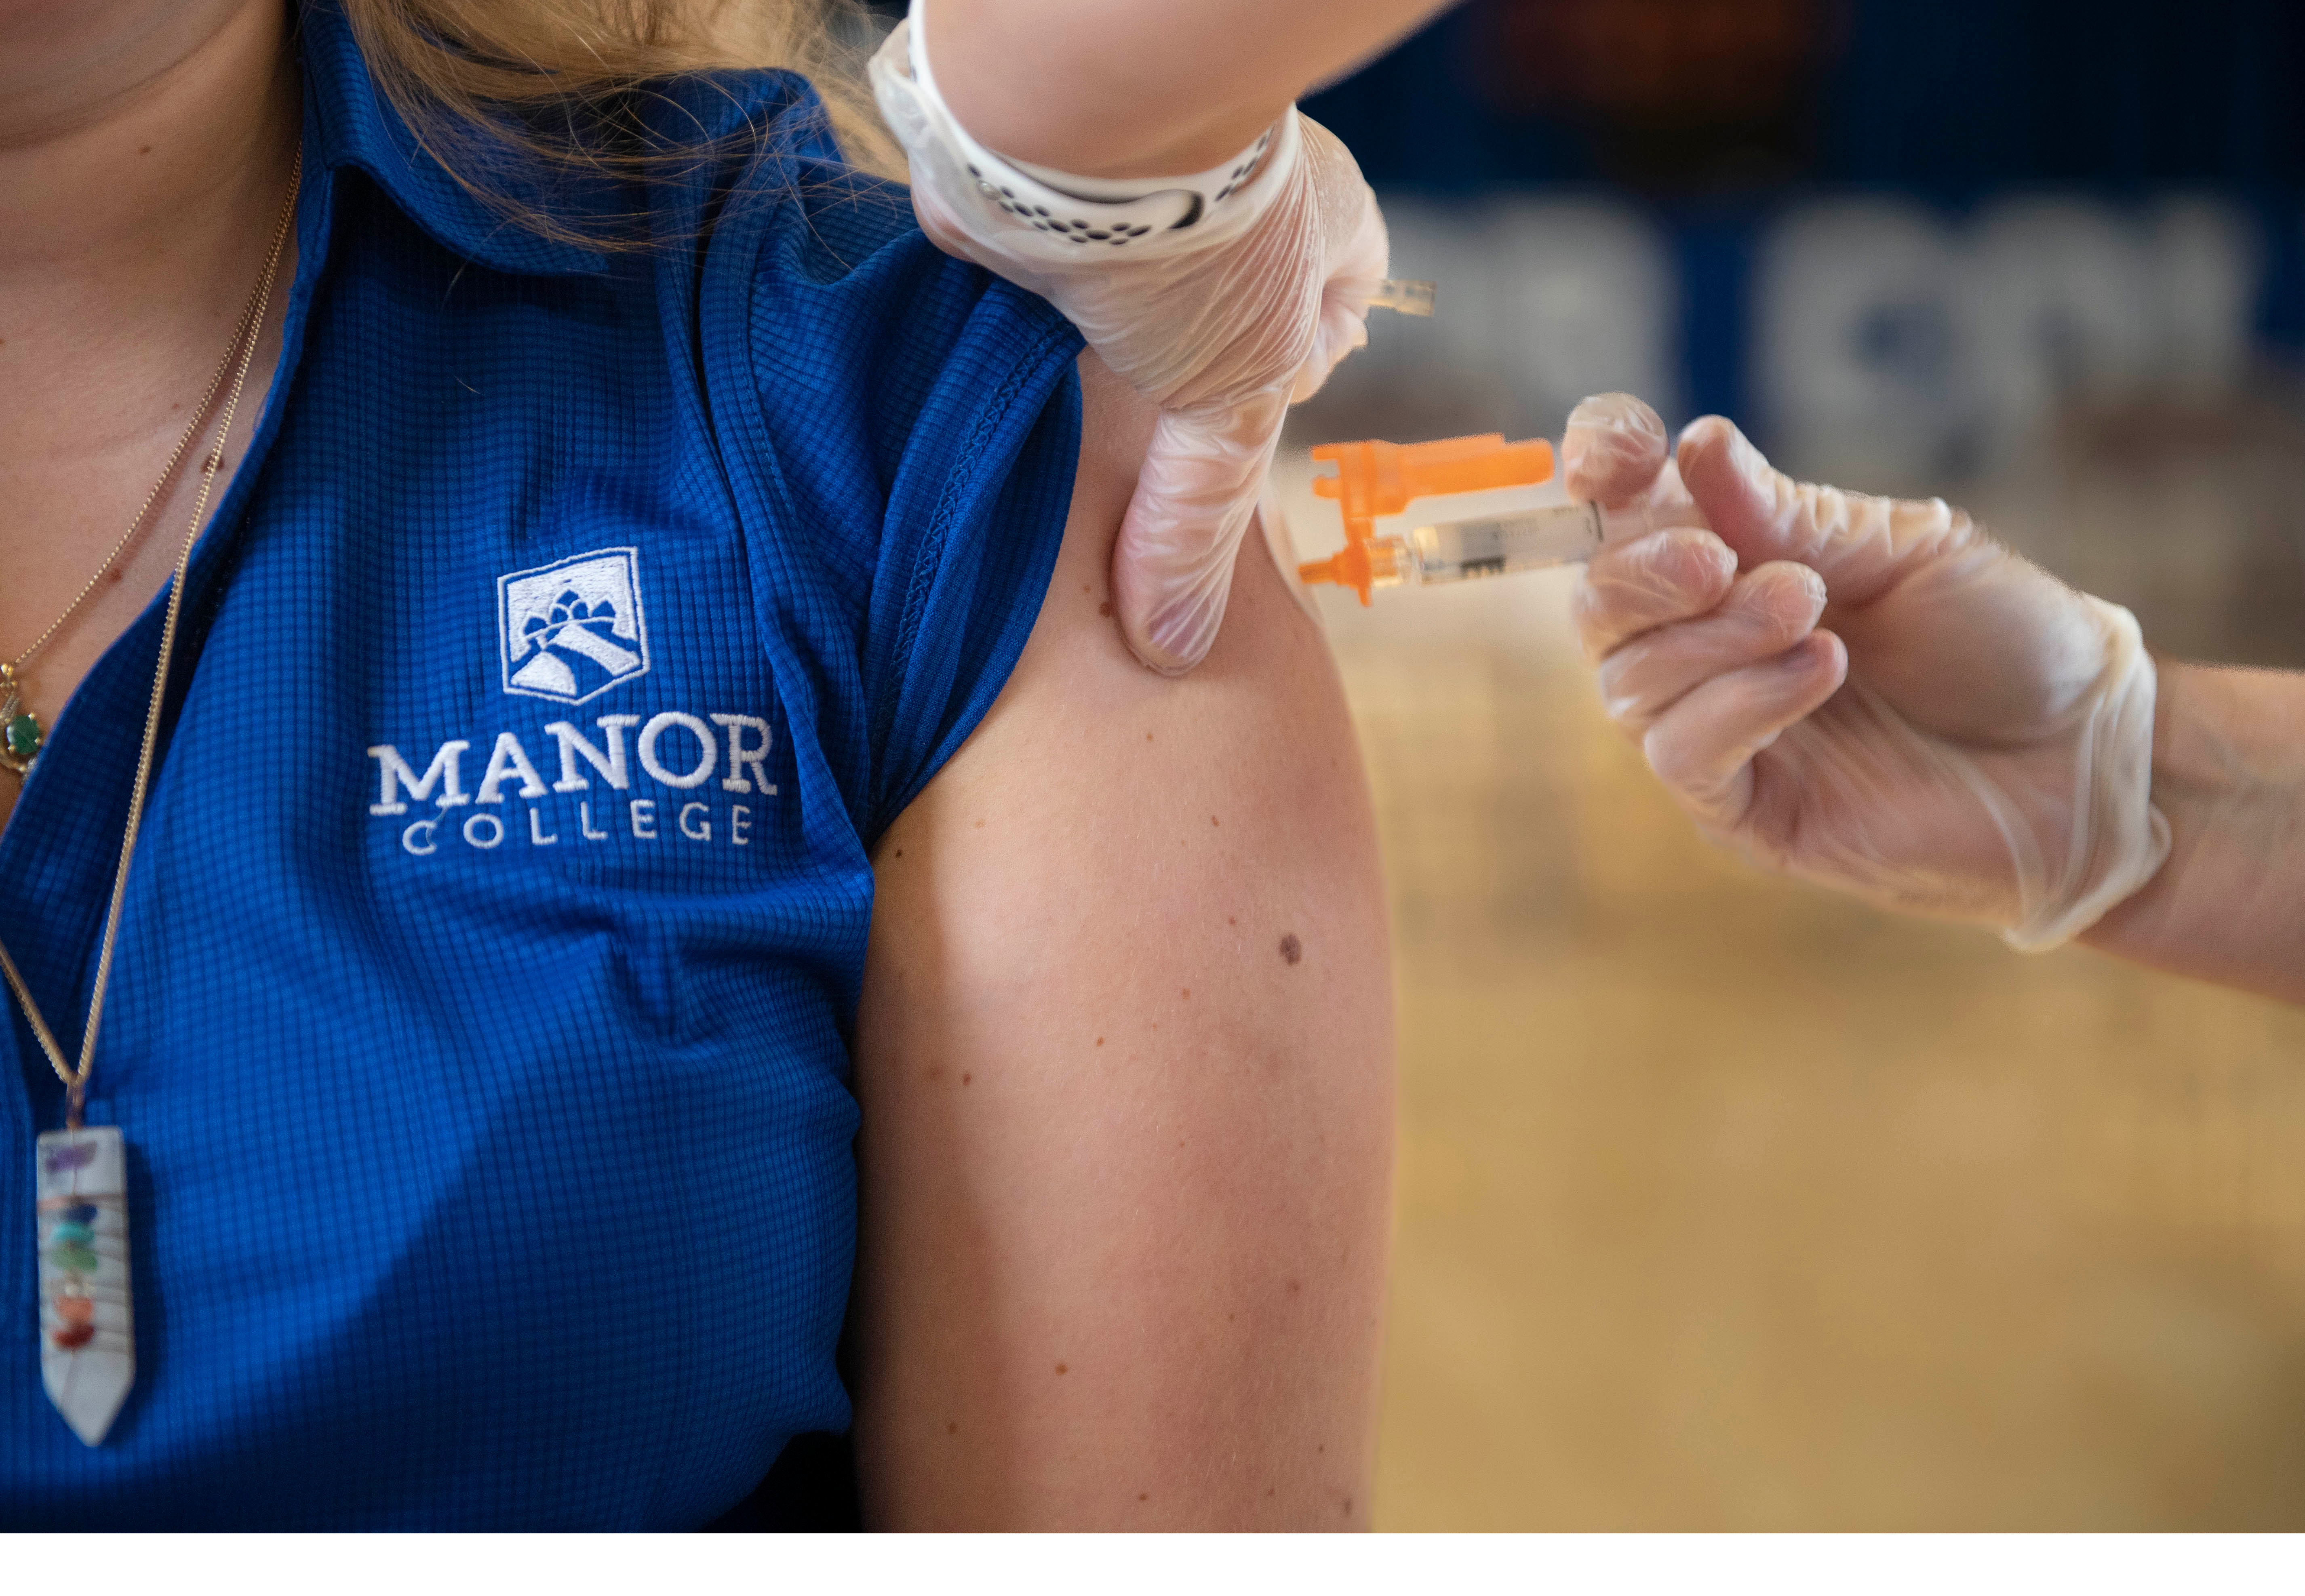 Close-up shot of student wearing Manor college shirt getting vaccine from provider